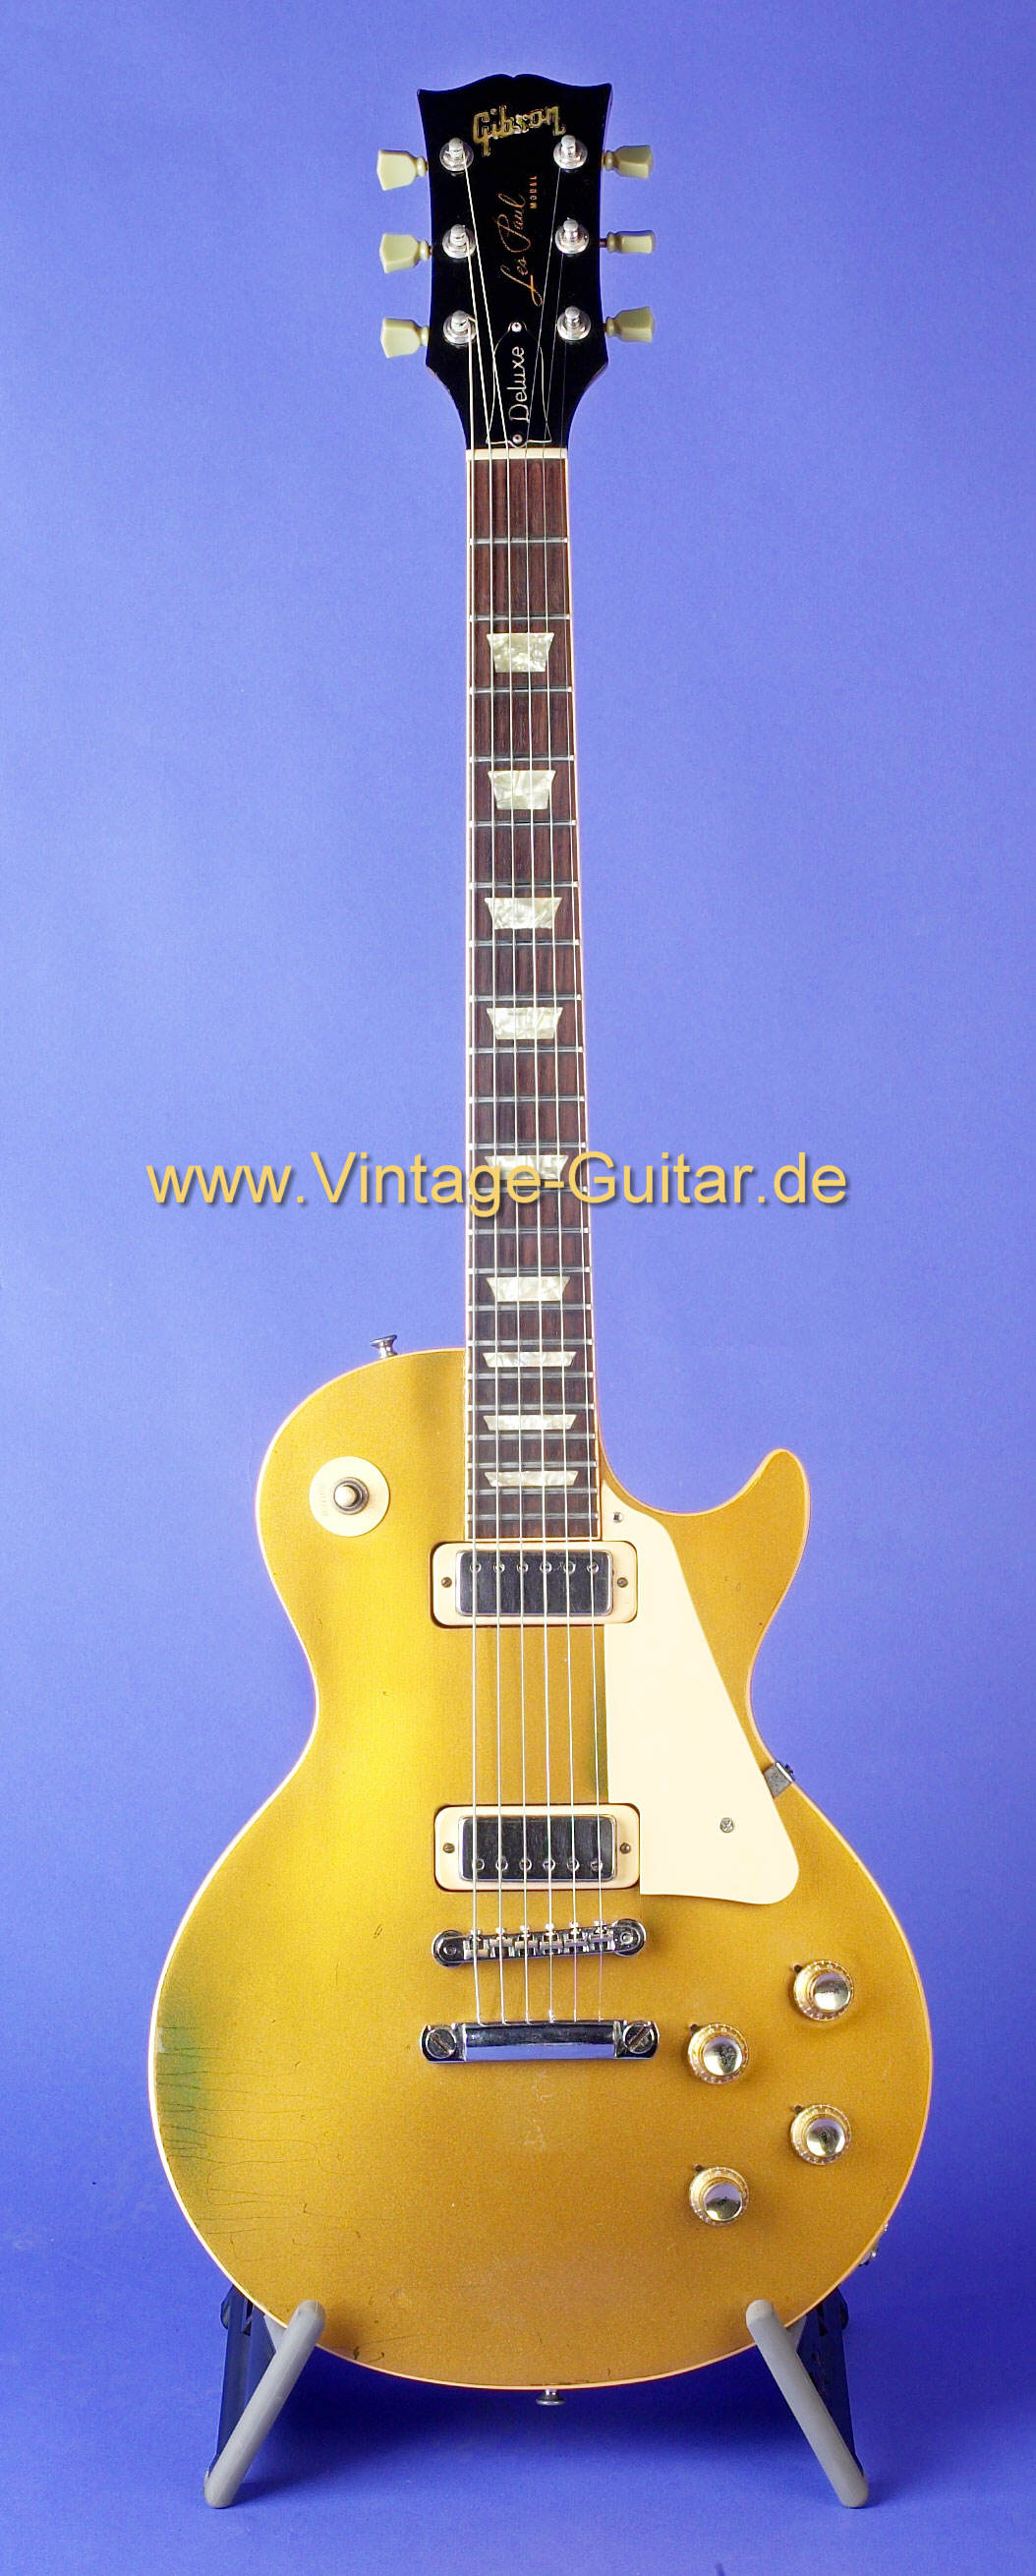 Gibson-Les-Paul-Deluxe-1970-goldtop-a.jpg